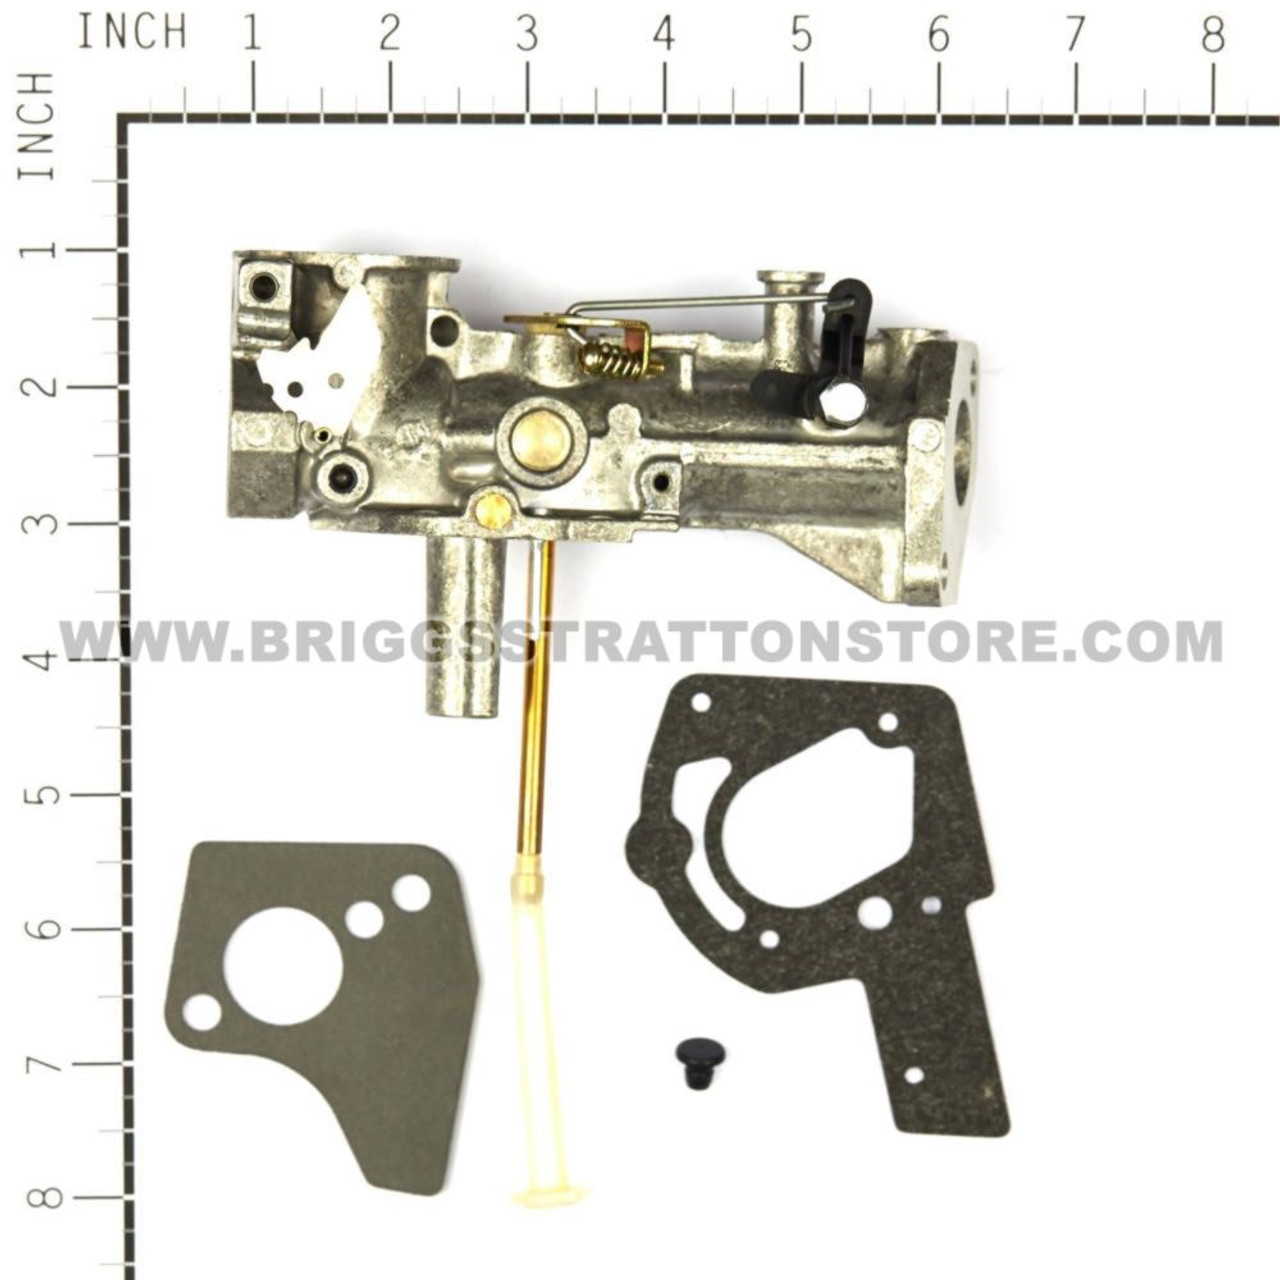 The ROP Shop Carburetor with Gaskets & Plug for Briggs & Stratton 498298 -  The Rop Shop